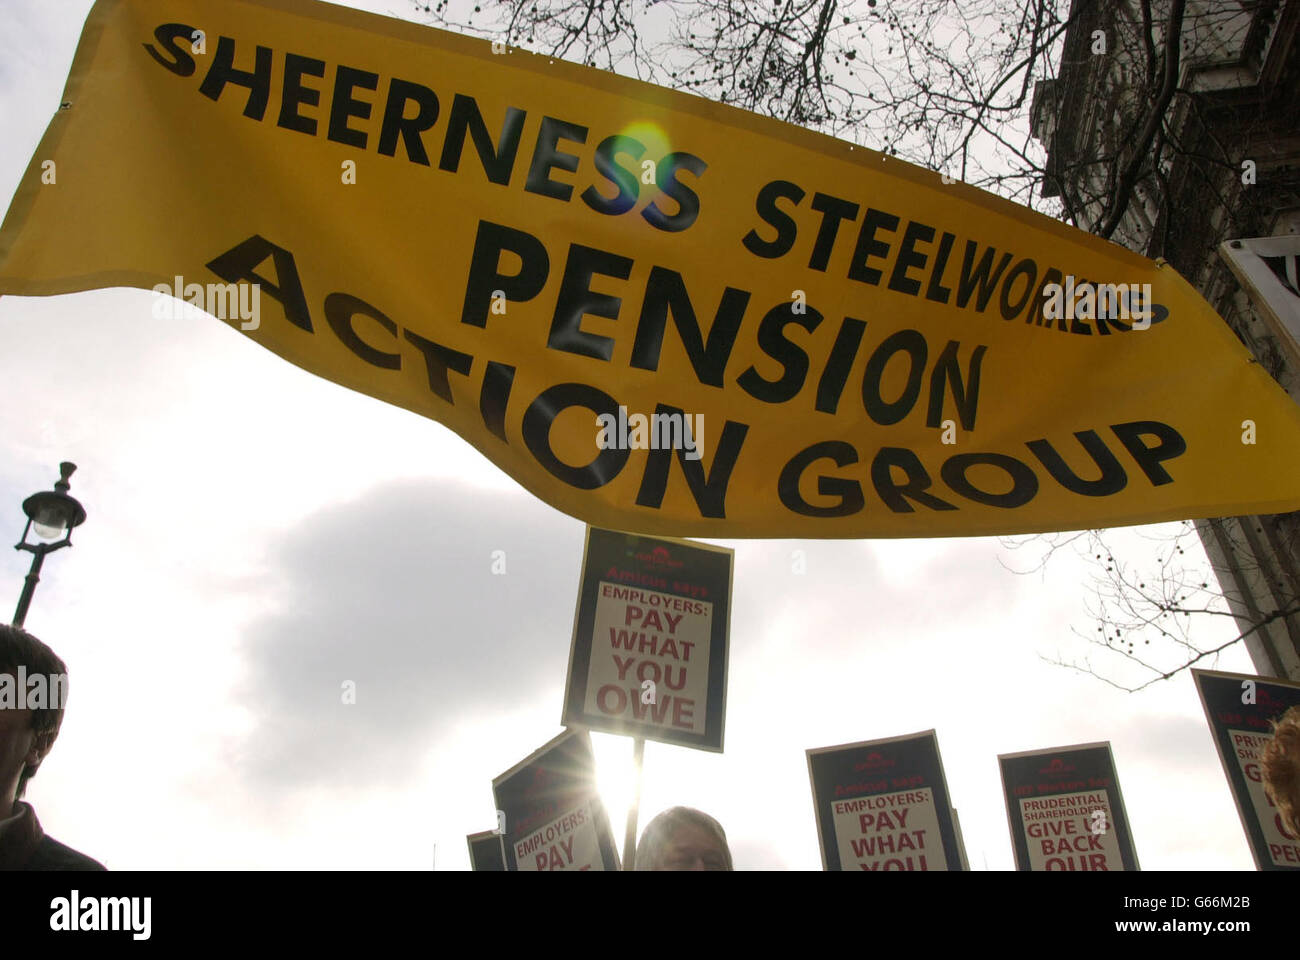 Members of the Sheerness Steelworkers Pension Action Group march along Whitehall in Westminster, central London, as they joined around 400 engineering workers to protest against pensions being slashed after United Engineering Forgings (UEF) went into insolvency in 2001. *... The Transport and General Workers Union claimed the company's pension fund was 'raided' to pay for redundancies, threatening pension payments to about 1,300 staff at UEF factories in Ayr, the Midlands and Yorkshire. Stock Photo